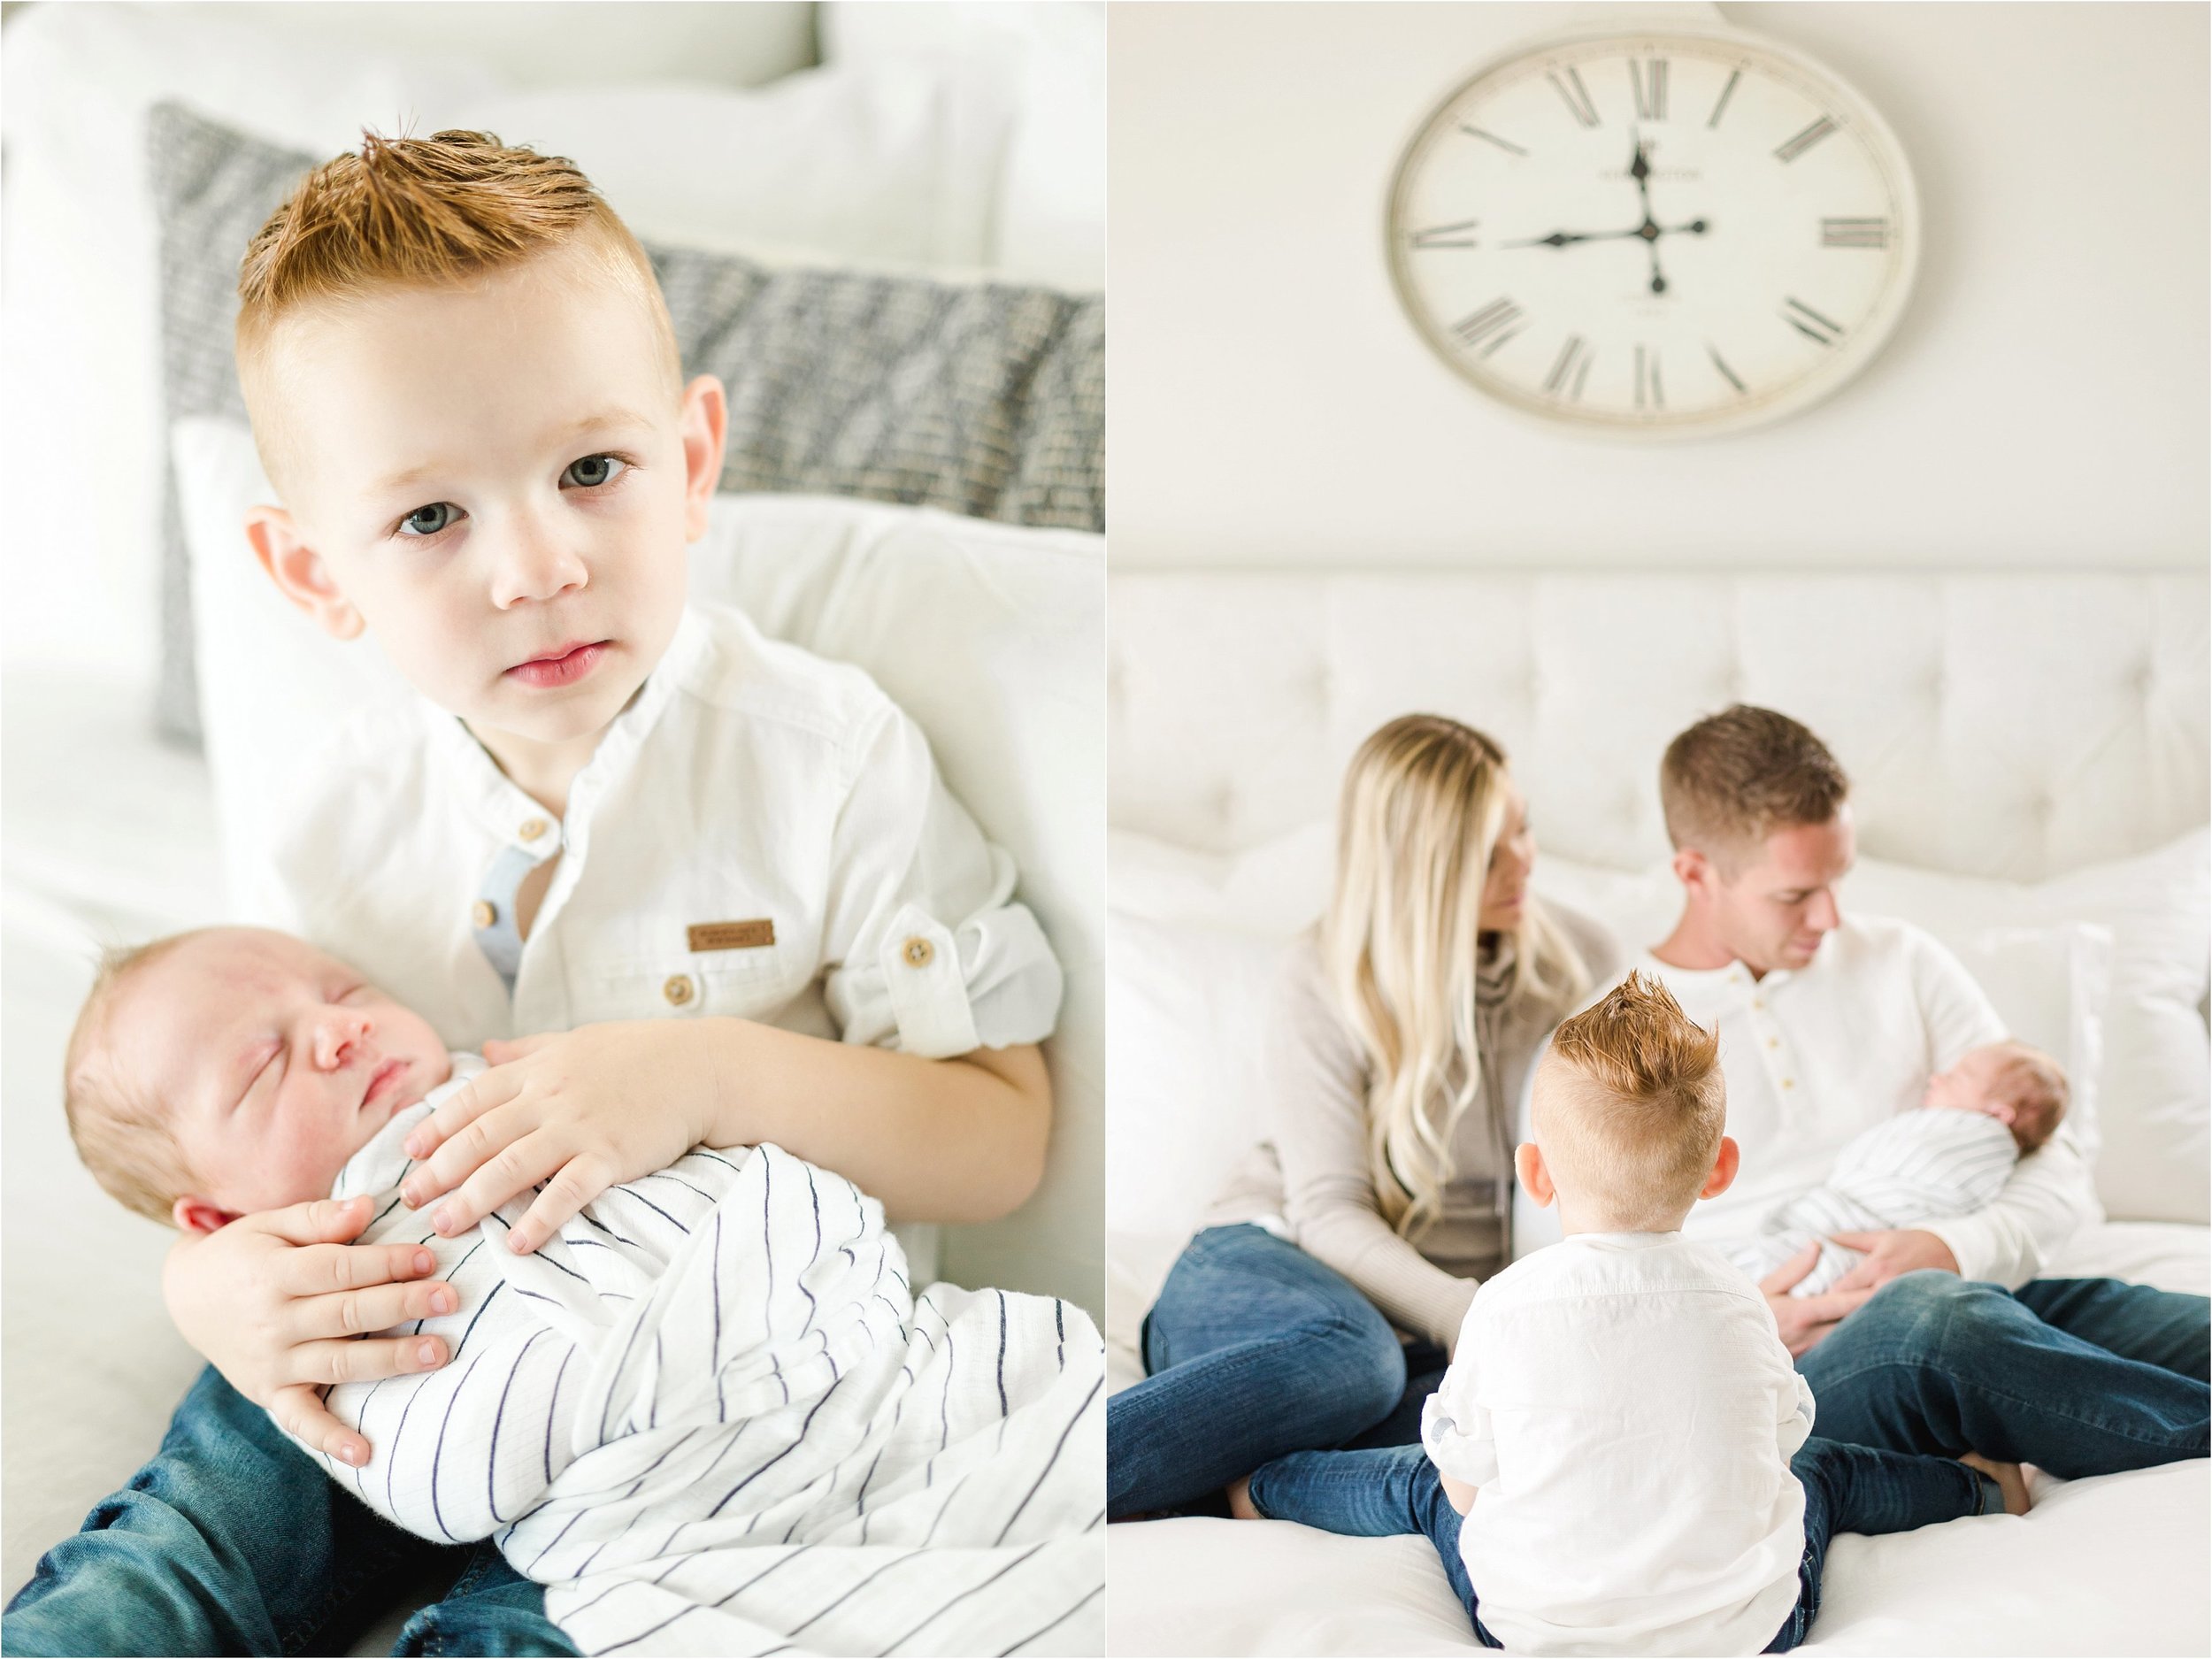 Image on the left shows big brother holding his baby brother.  Image on the right shows parents sitting on bed holding their newborn son while older son looks at them.